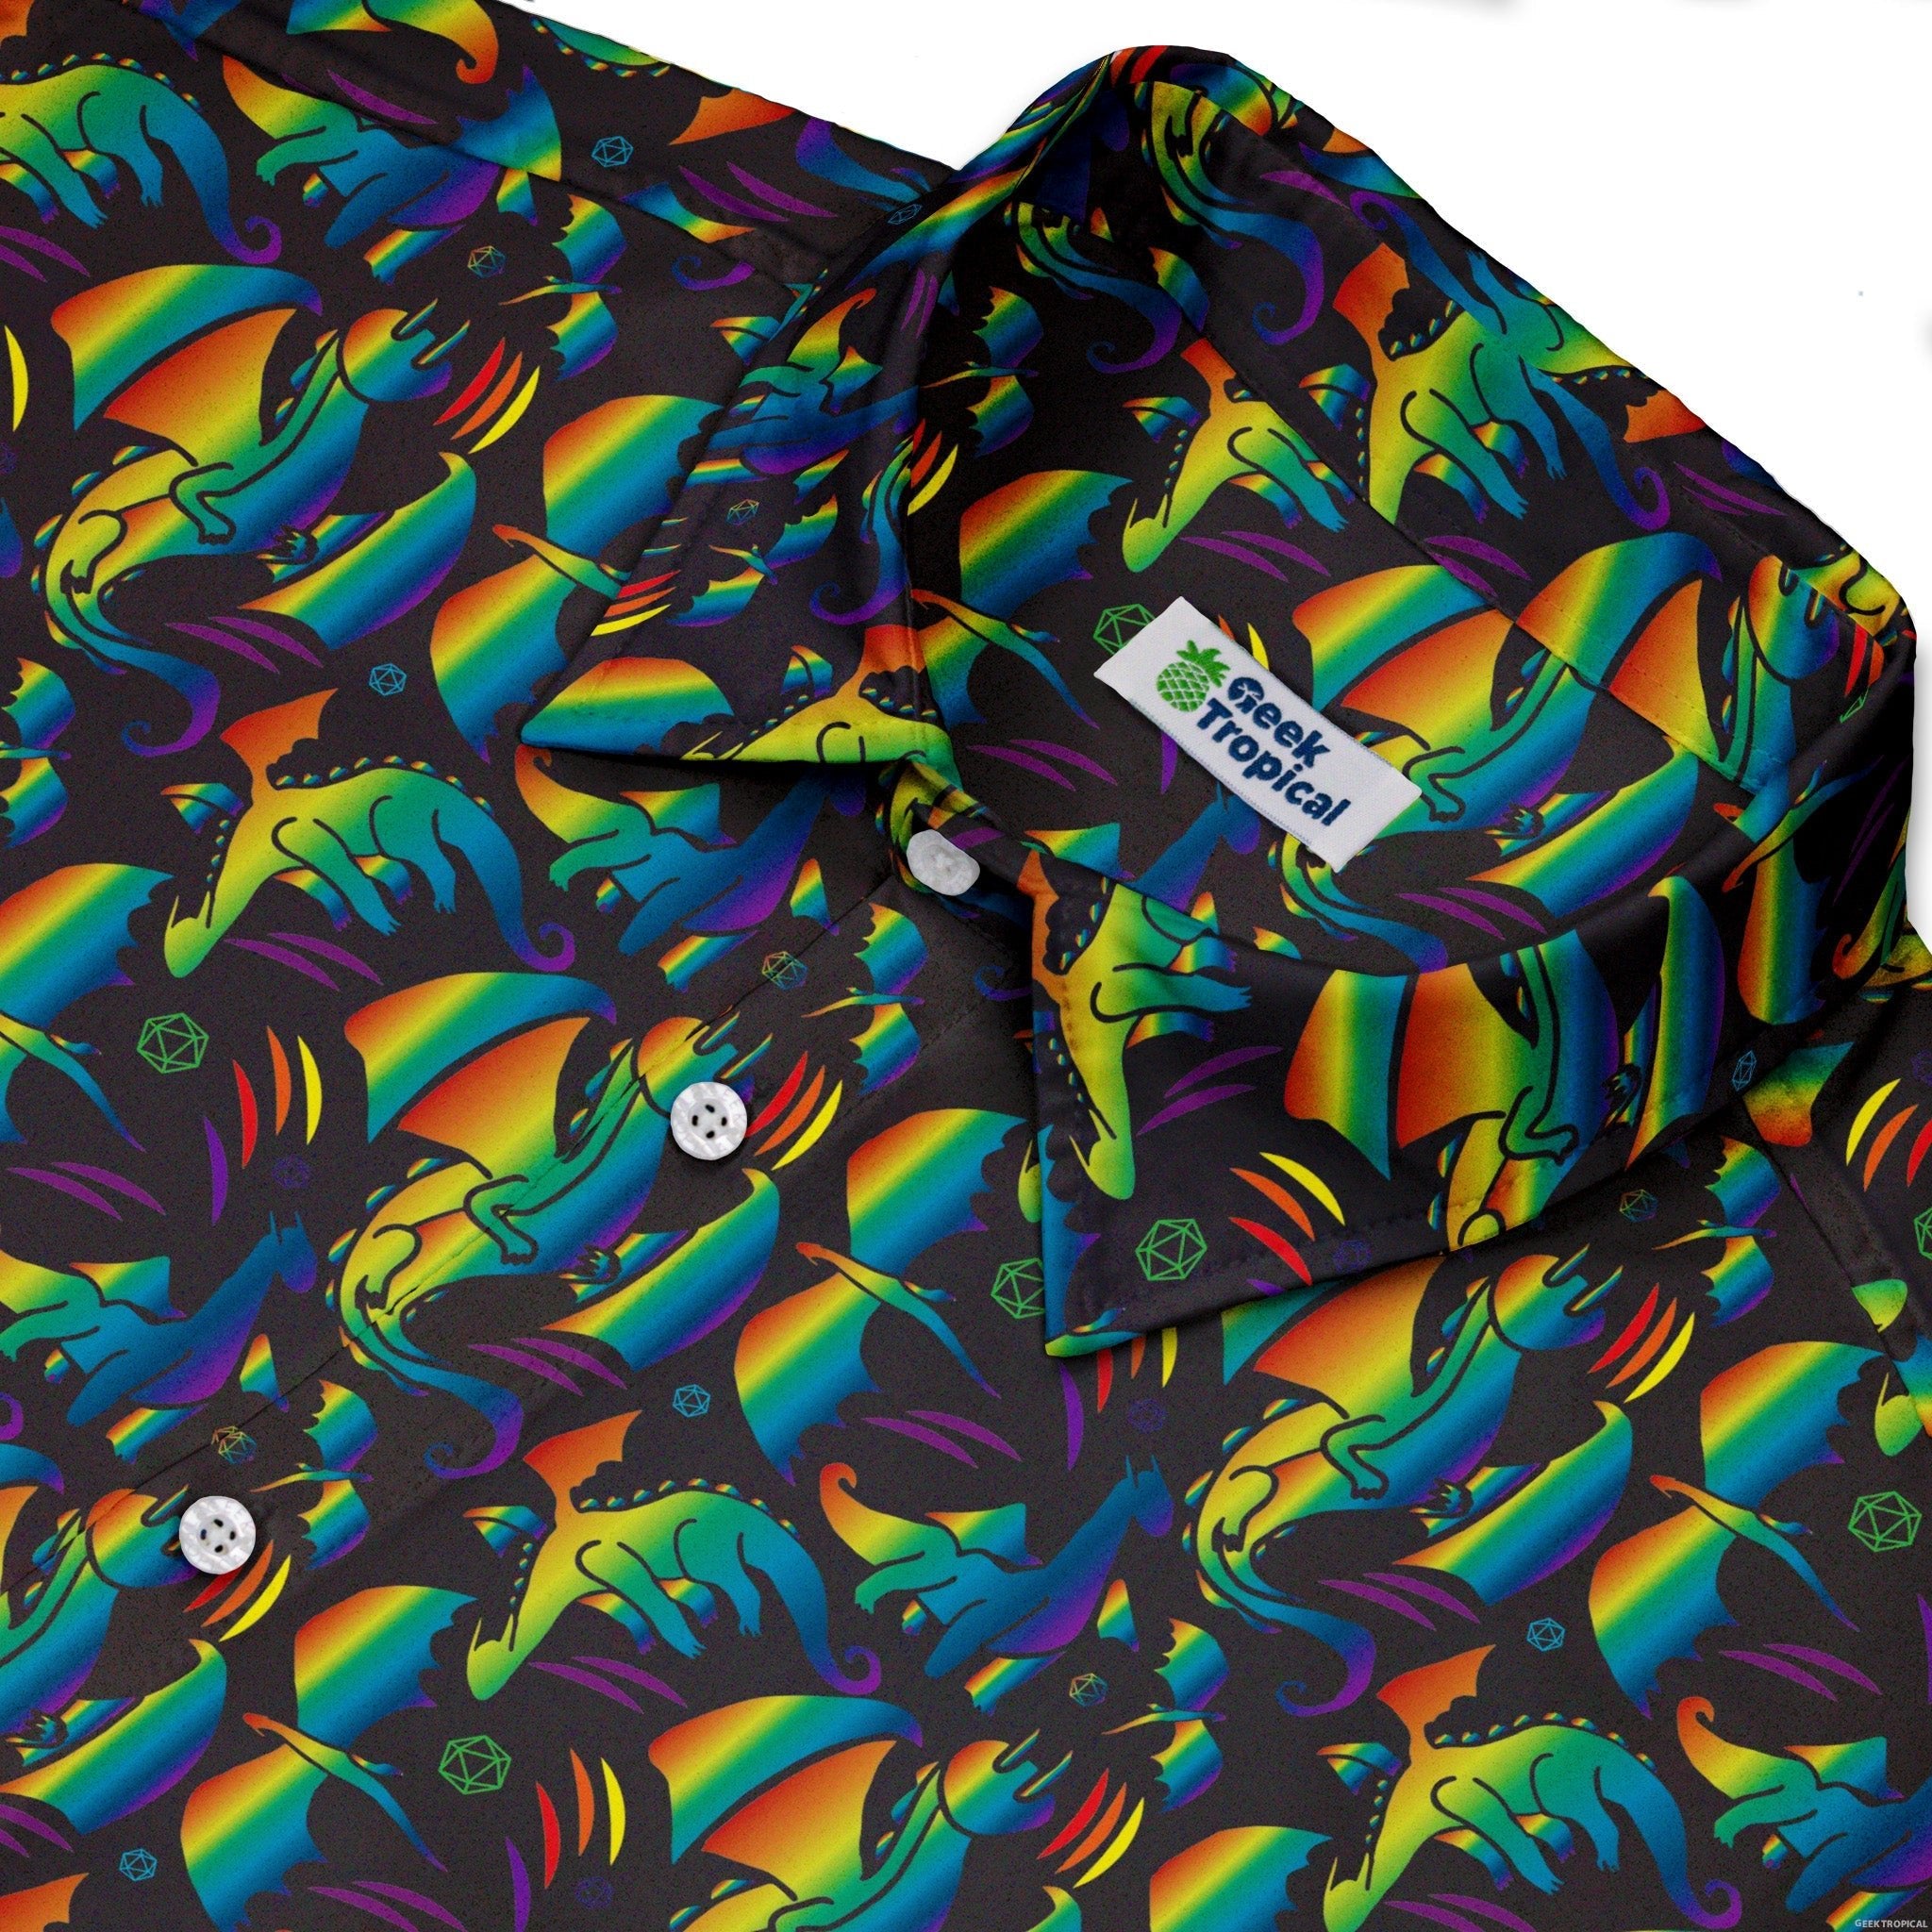 Rainbow Dragons DND Dice Black Button Up Shirt - adult sizing - Animal Patterns - Design by Heather Davenport